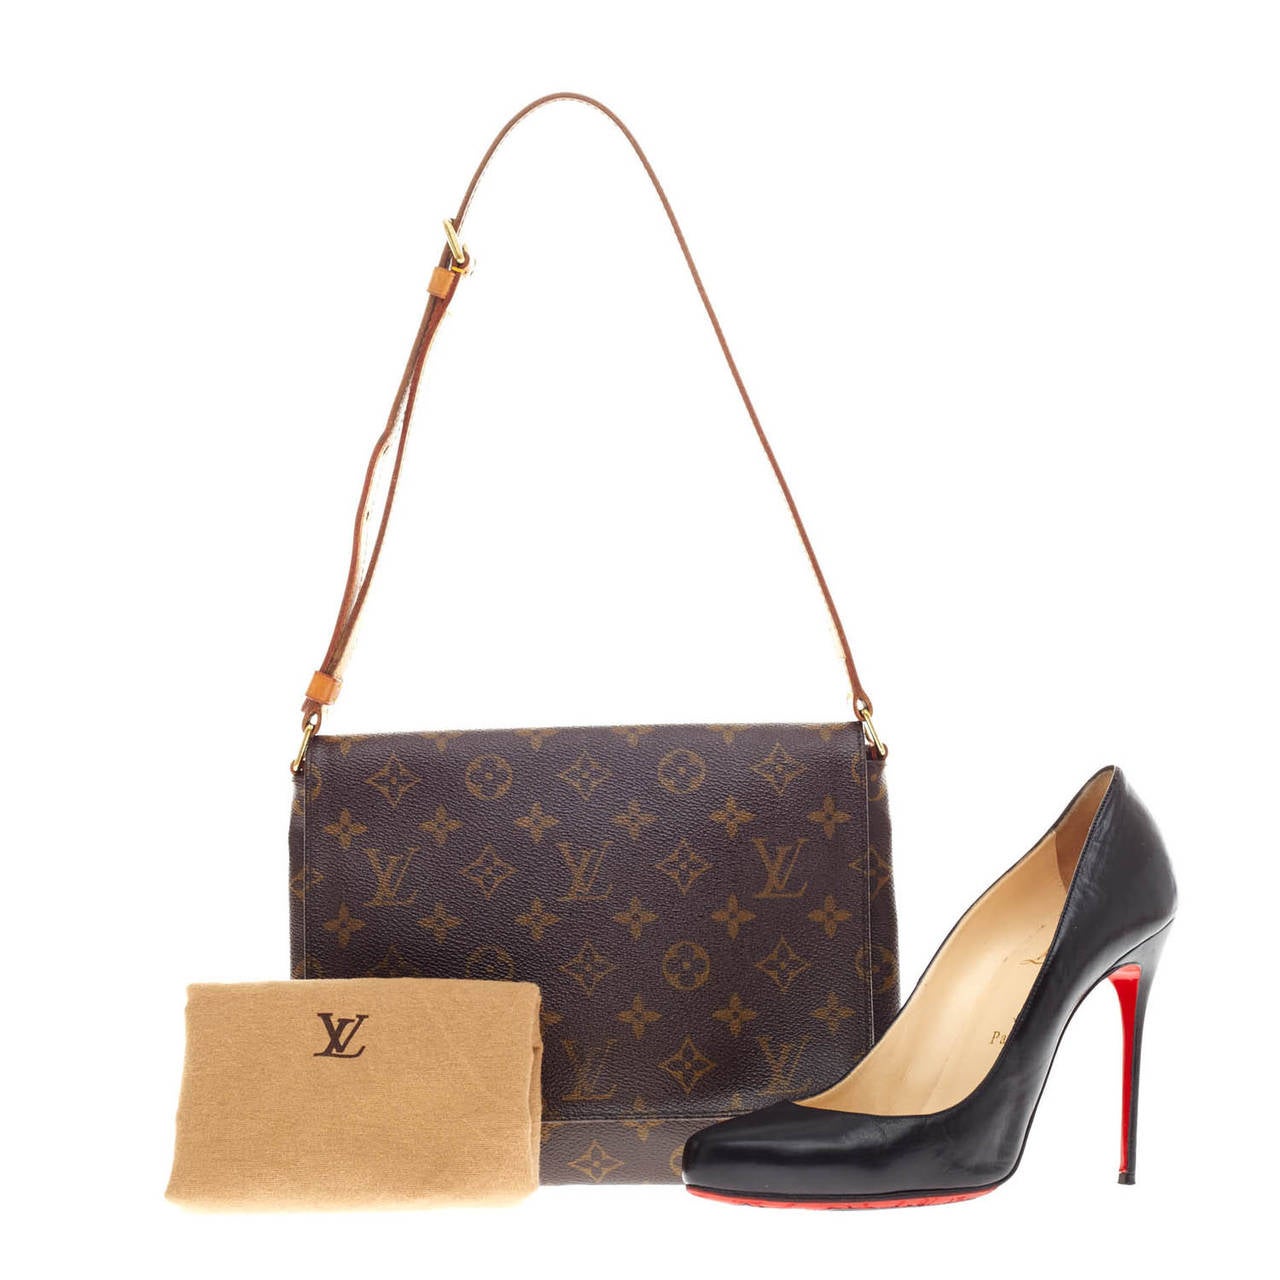 This authentic Louis Vuitton Musette Tango Monogram Canvas Shoulder Bag features the classic Louis Vuitton monogram canvas print on a simple, classic satchel design. This bag features a full flap style, with adjustable cowhide leather strap for